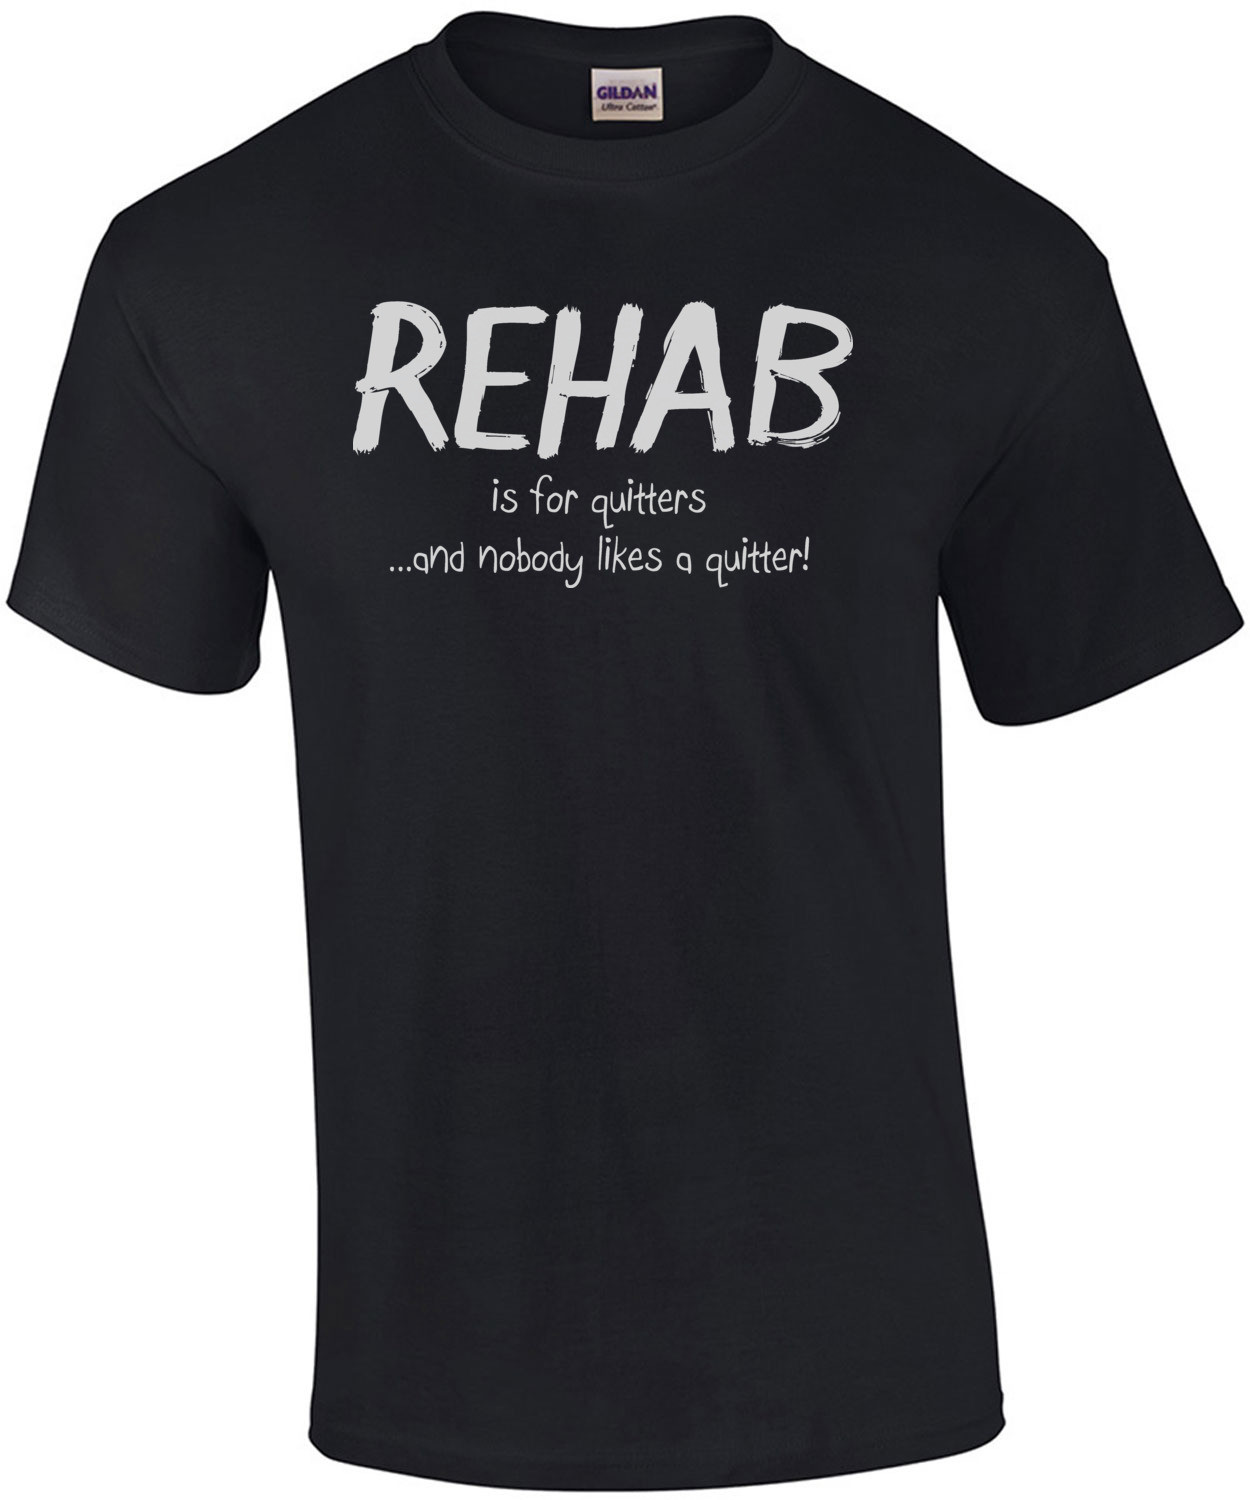 Rehab Is For Quitters And Nobody Likes A Quitter Shirt